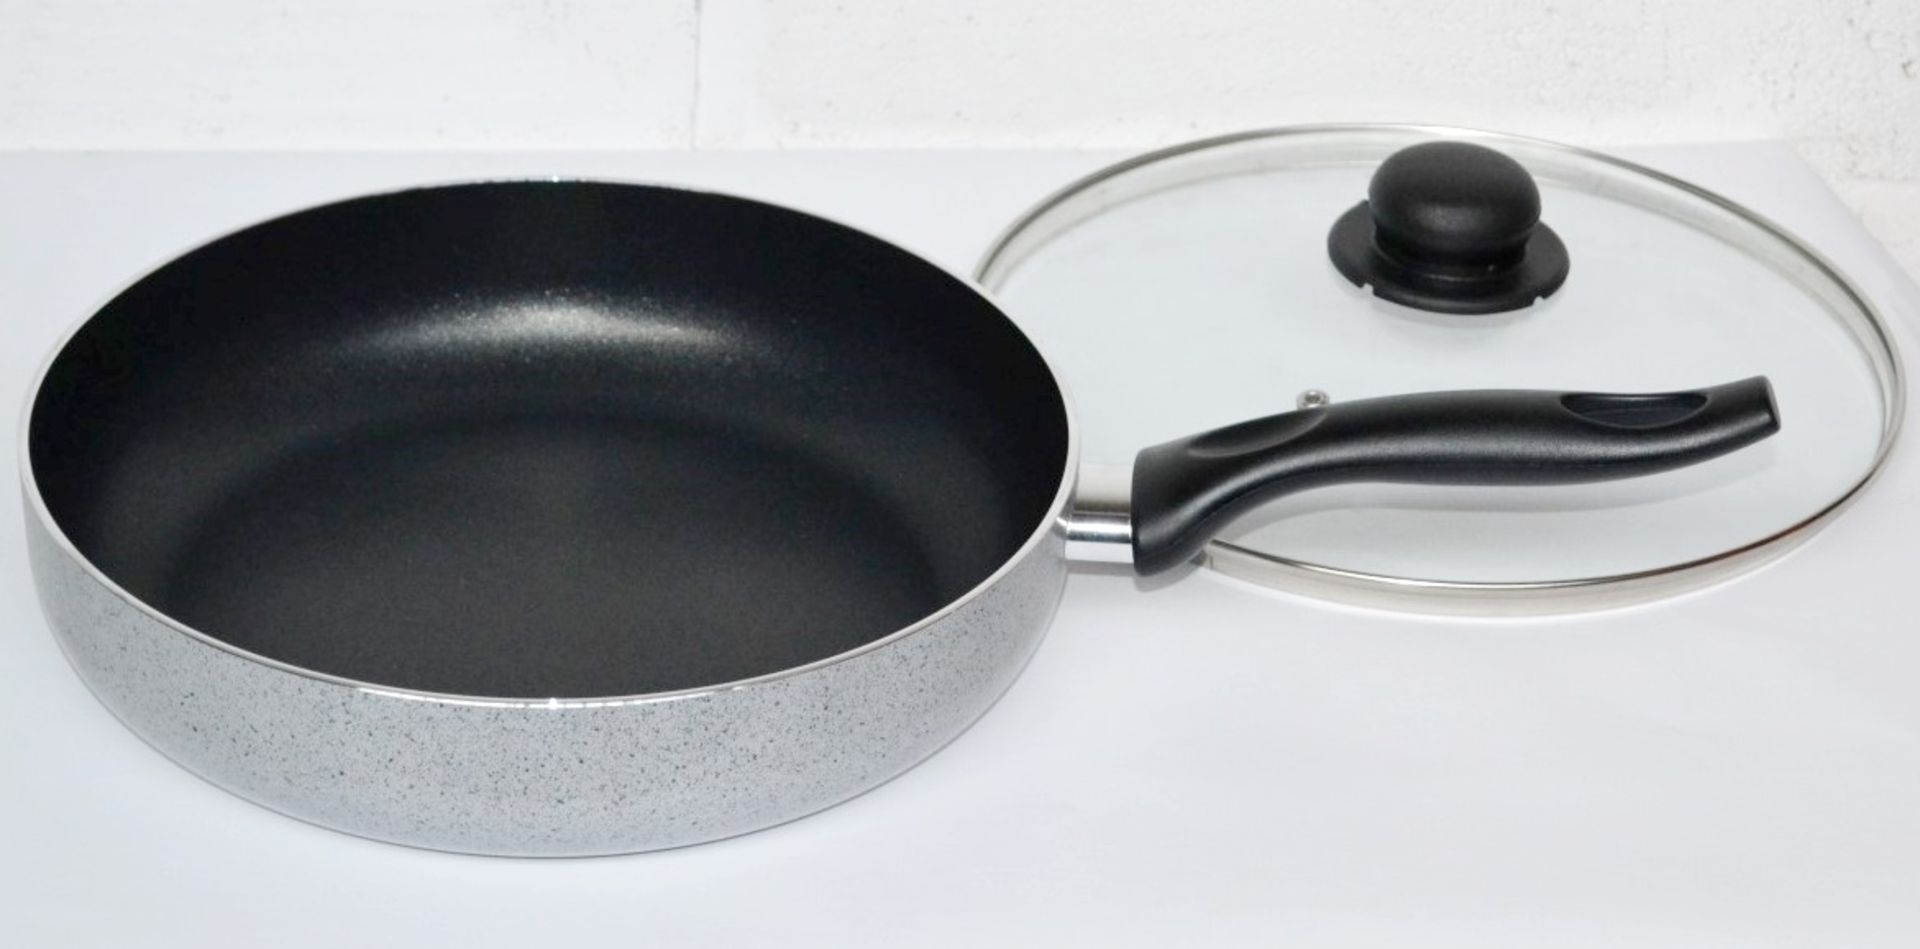 1 x 28cm Non-stick Frying Pans with Glass Lids - Colour: Black - Made In Italy - New & Sealed Stock, - Image 2 of 5